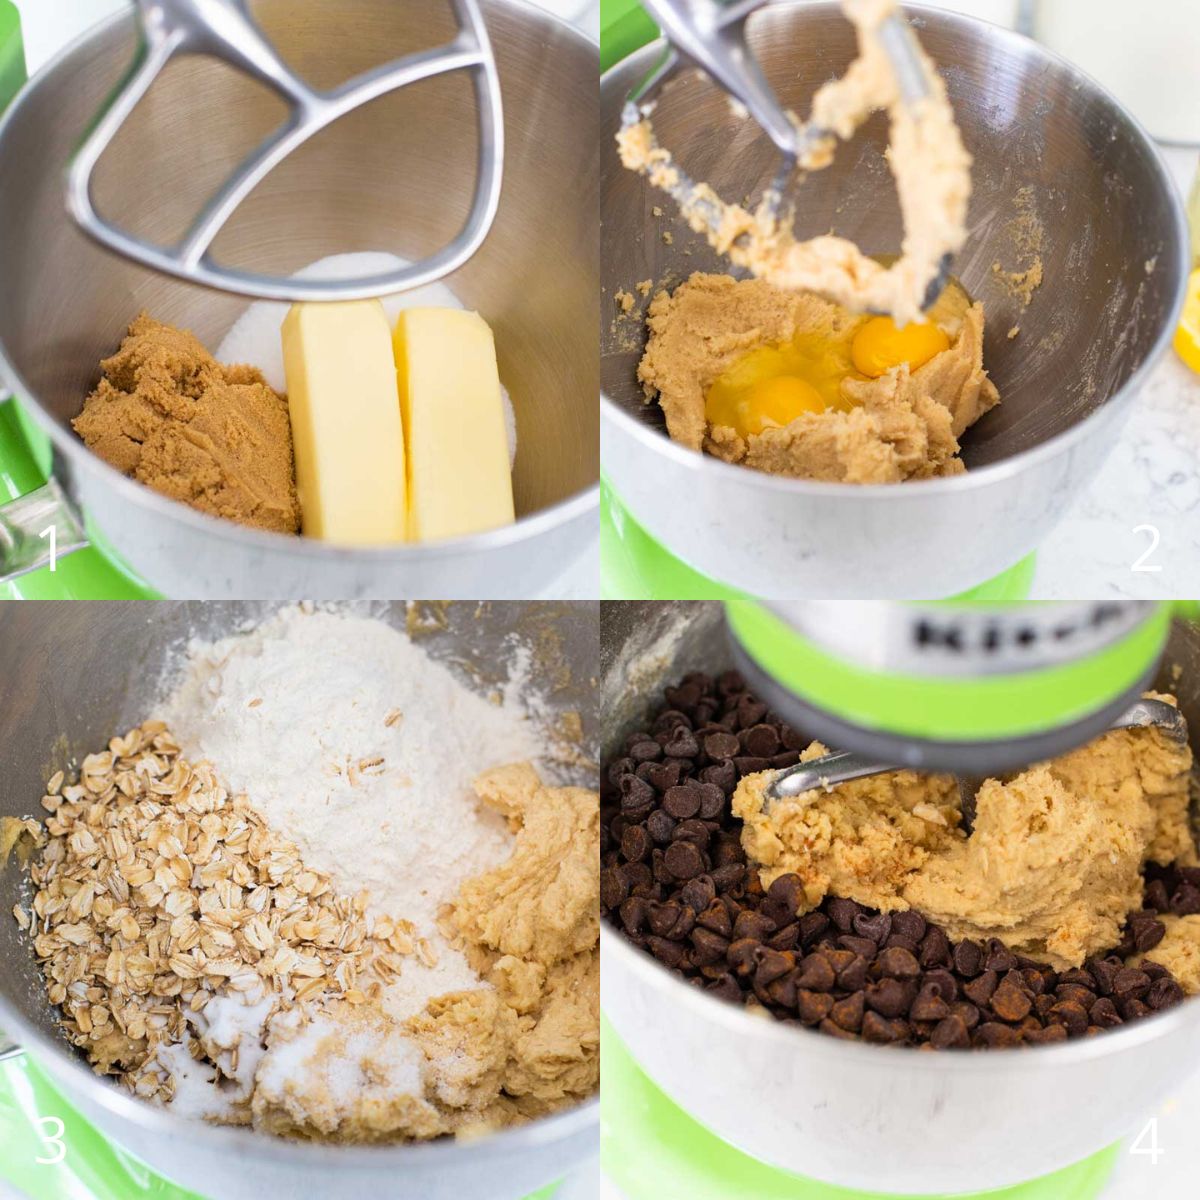 The step by step photos show how to make the cookie dough.